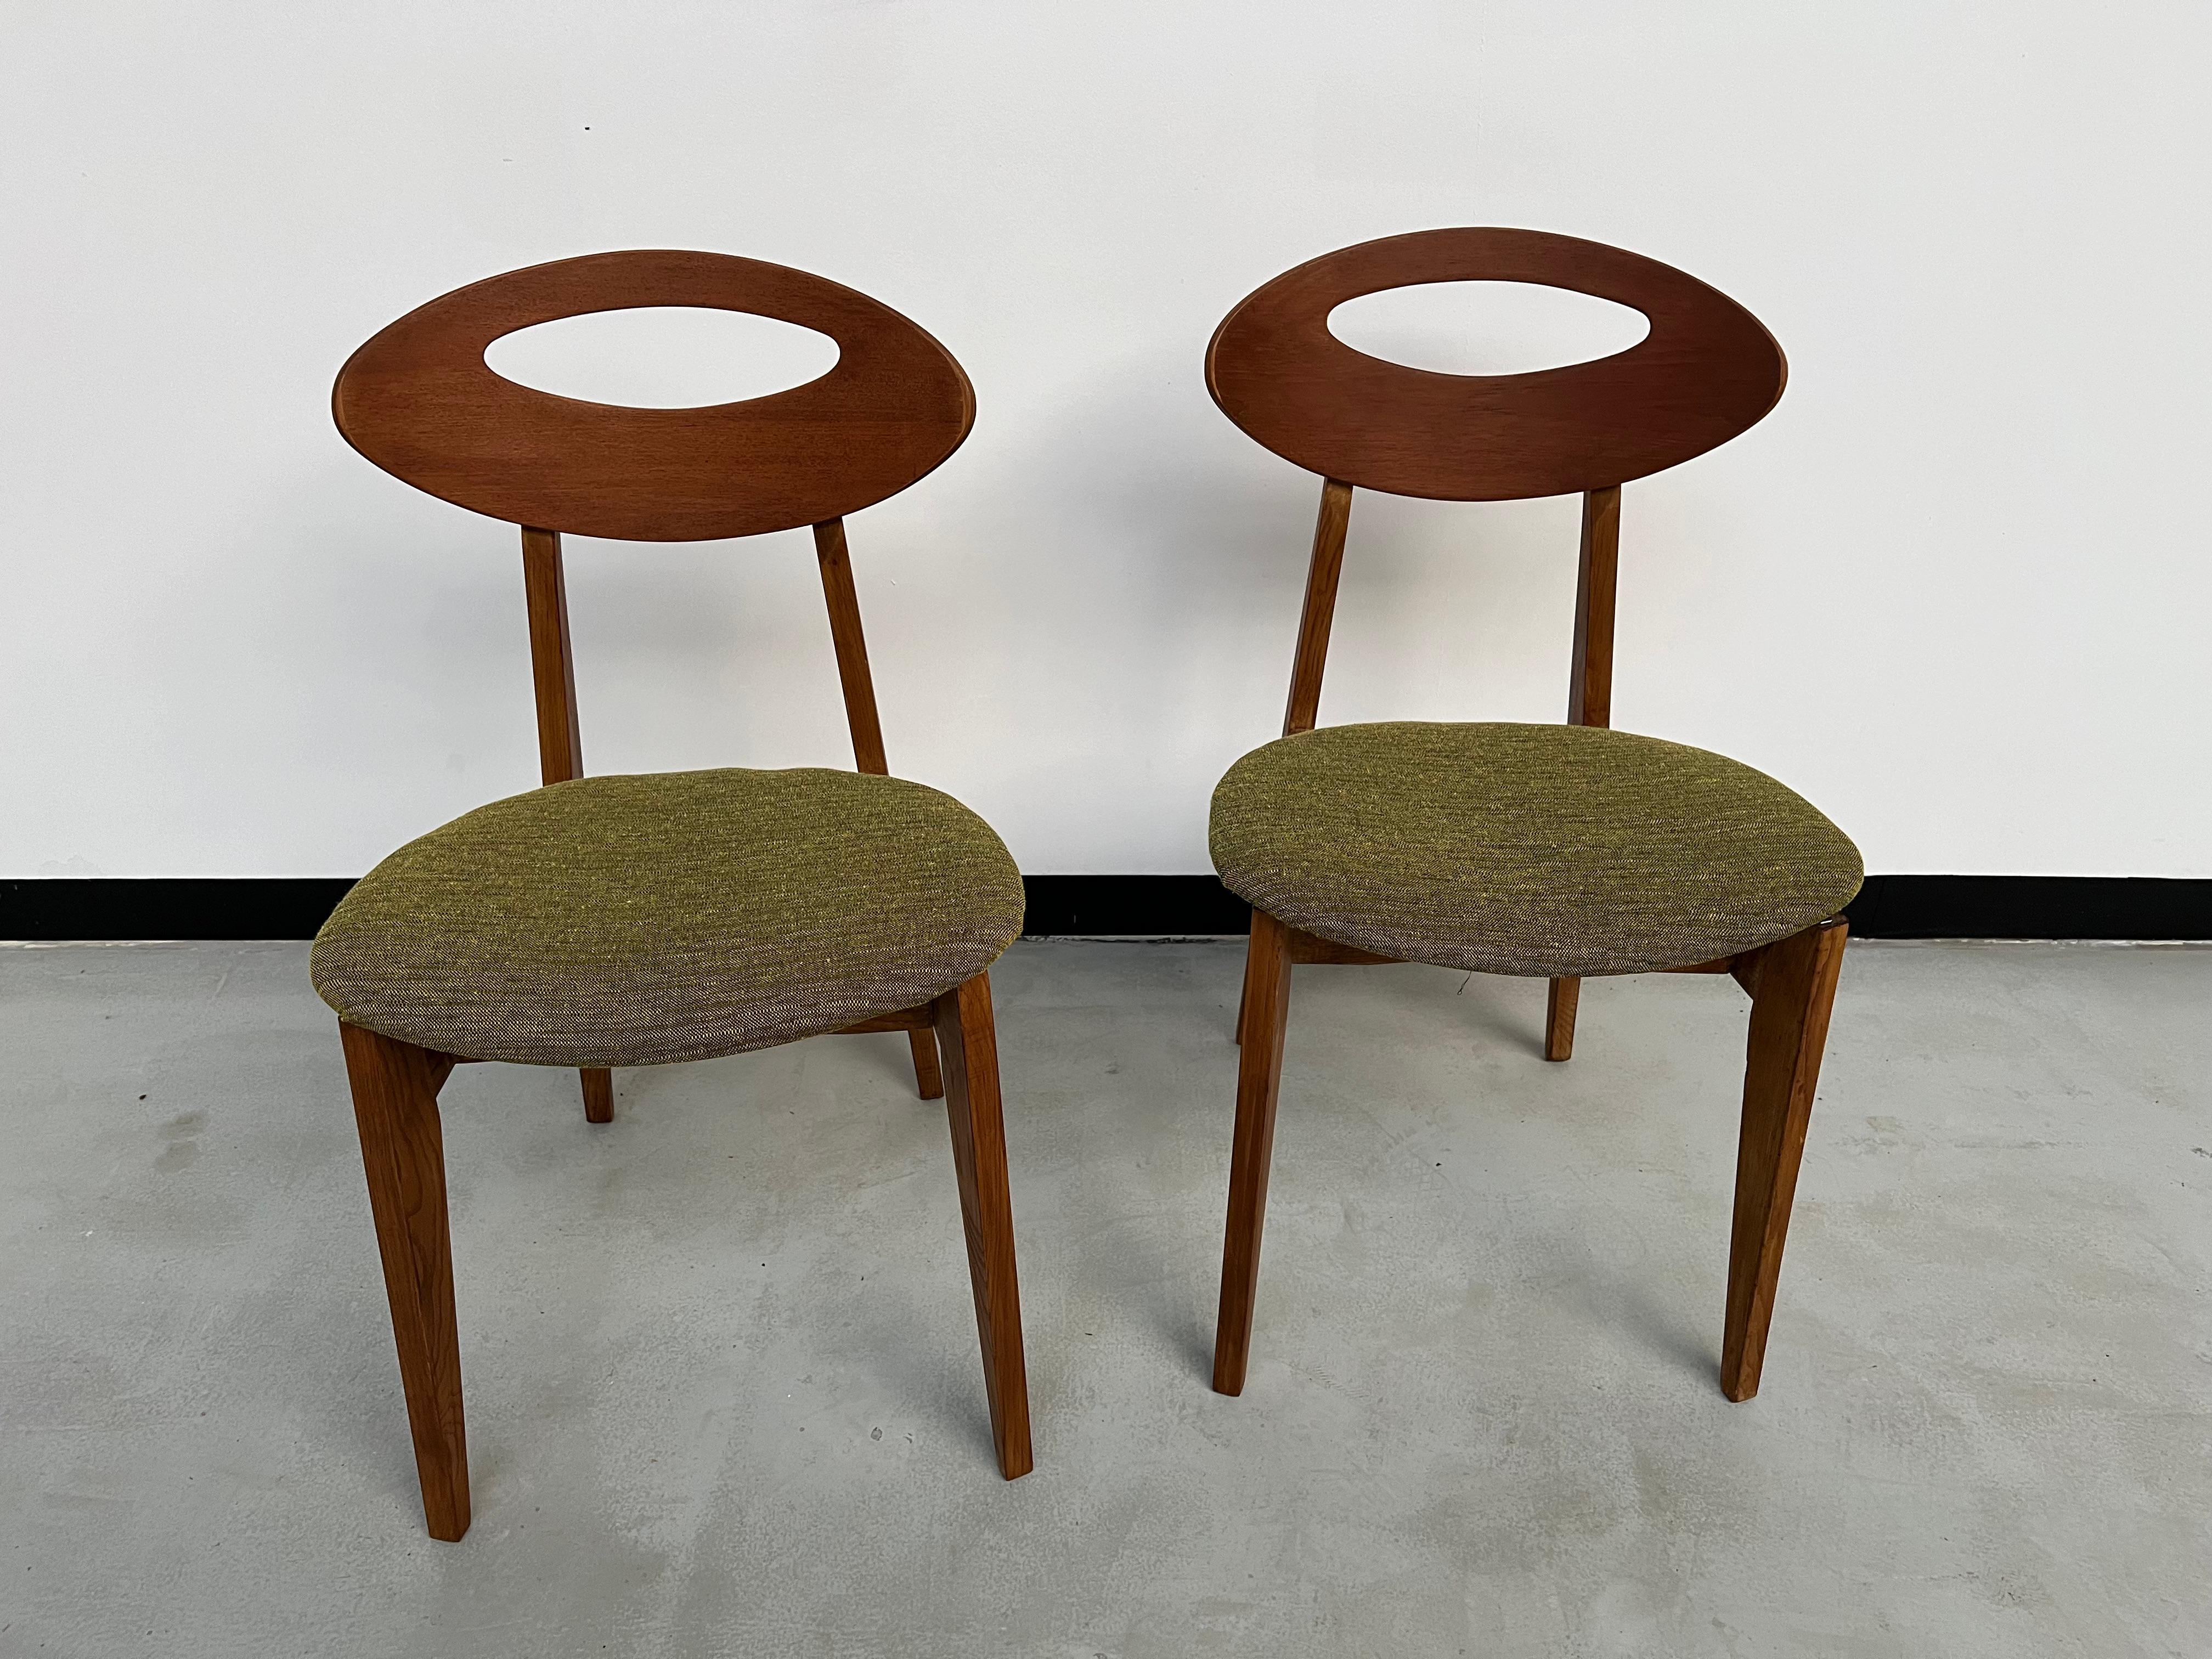  Duo of Roger Landault chairs for Sentou, France 50's 5